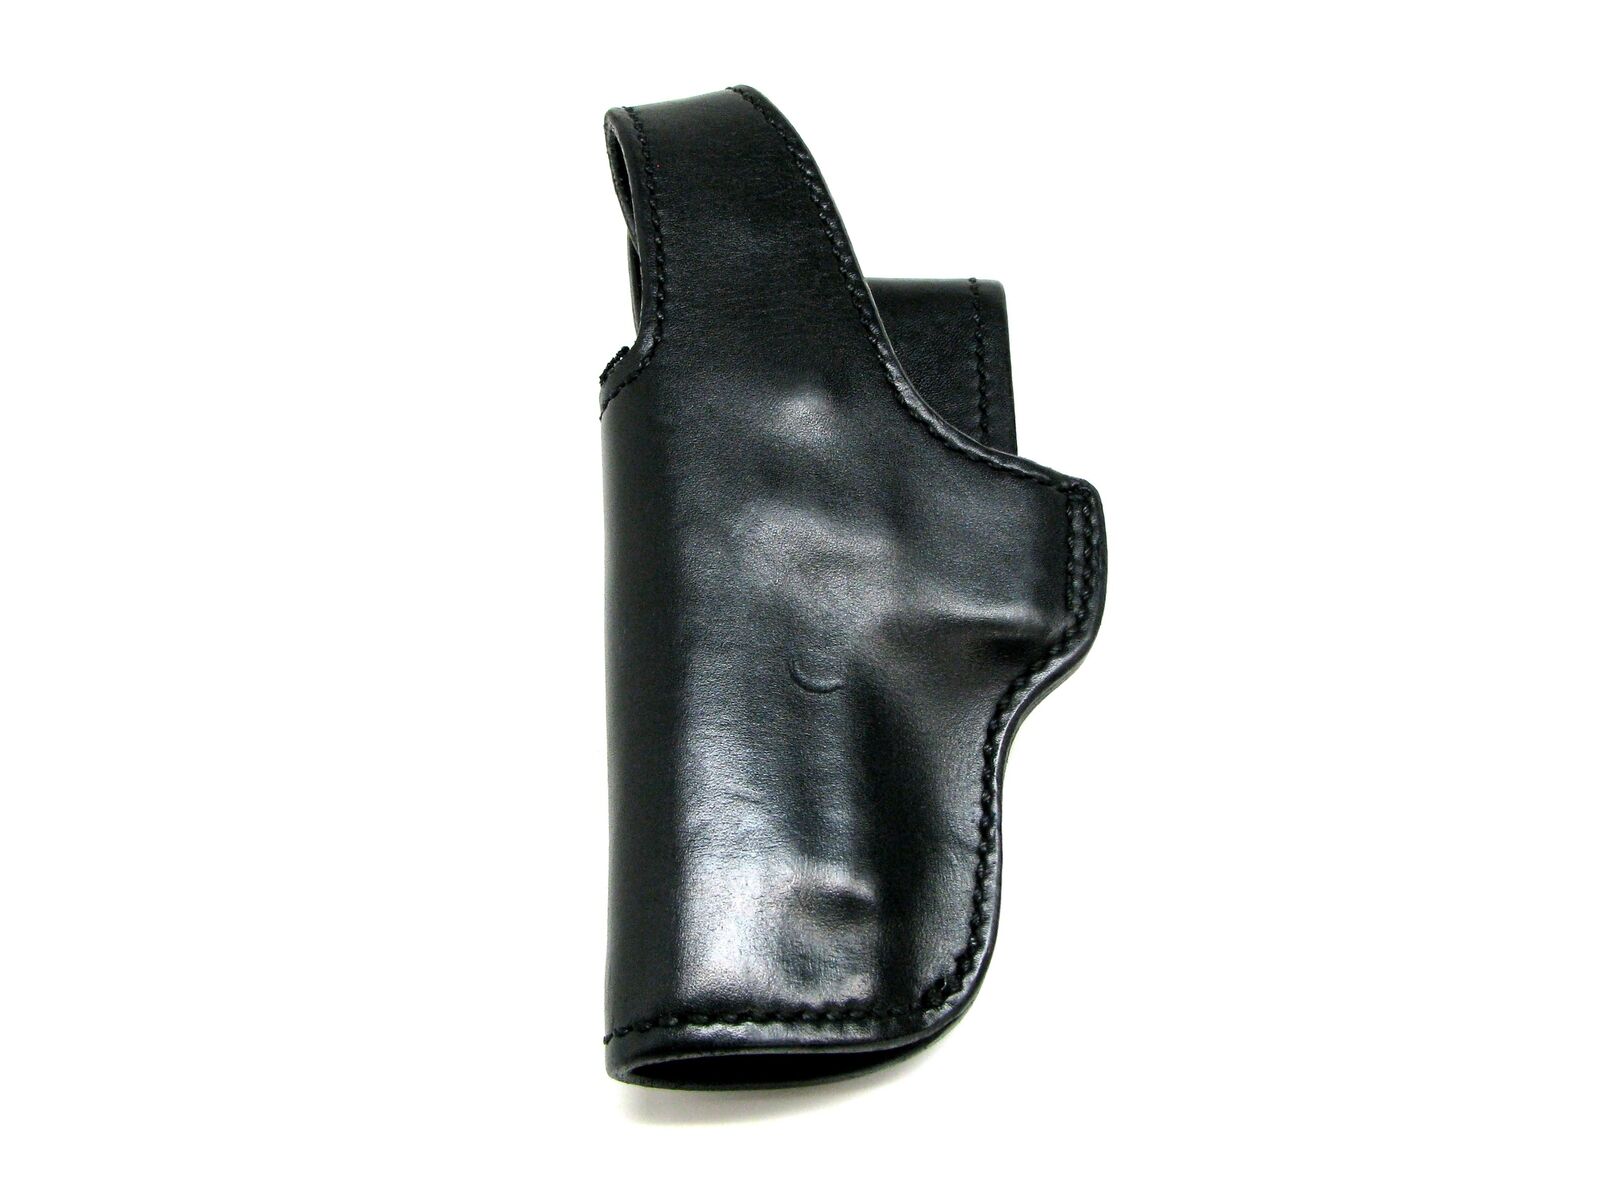 Holster fits Smith & Wesson 39, 59, 439, 459, 639, 659